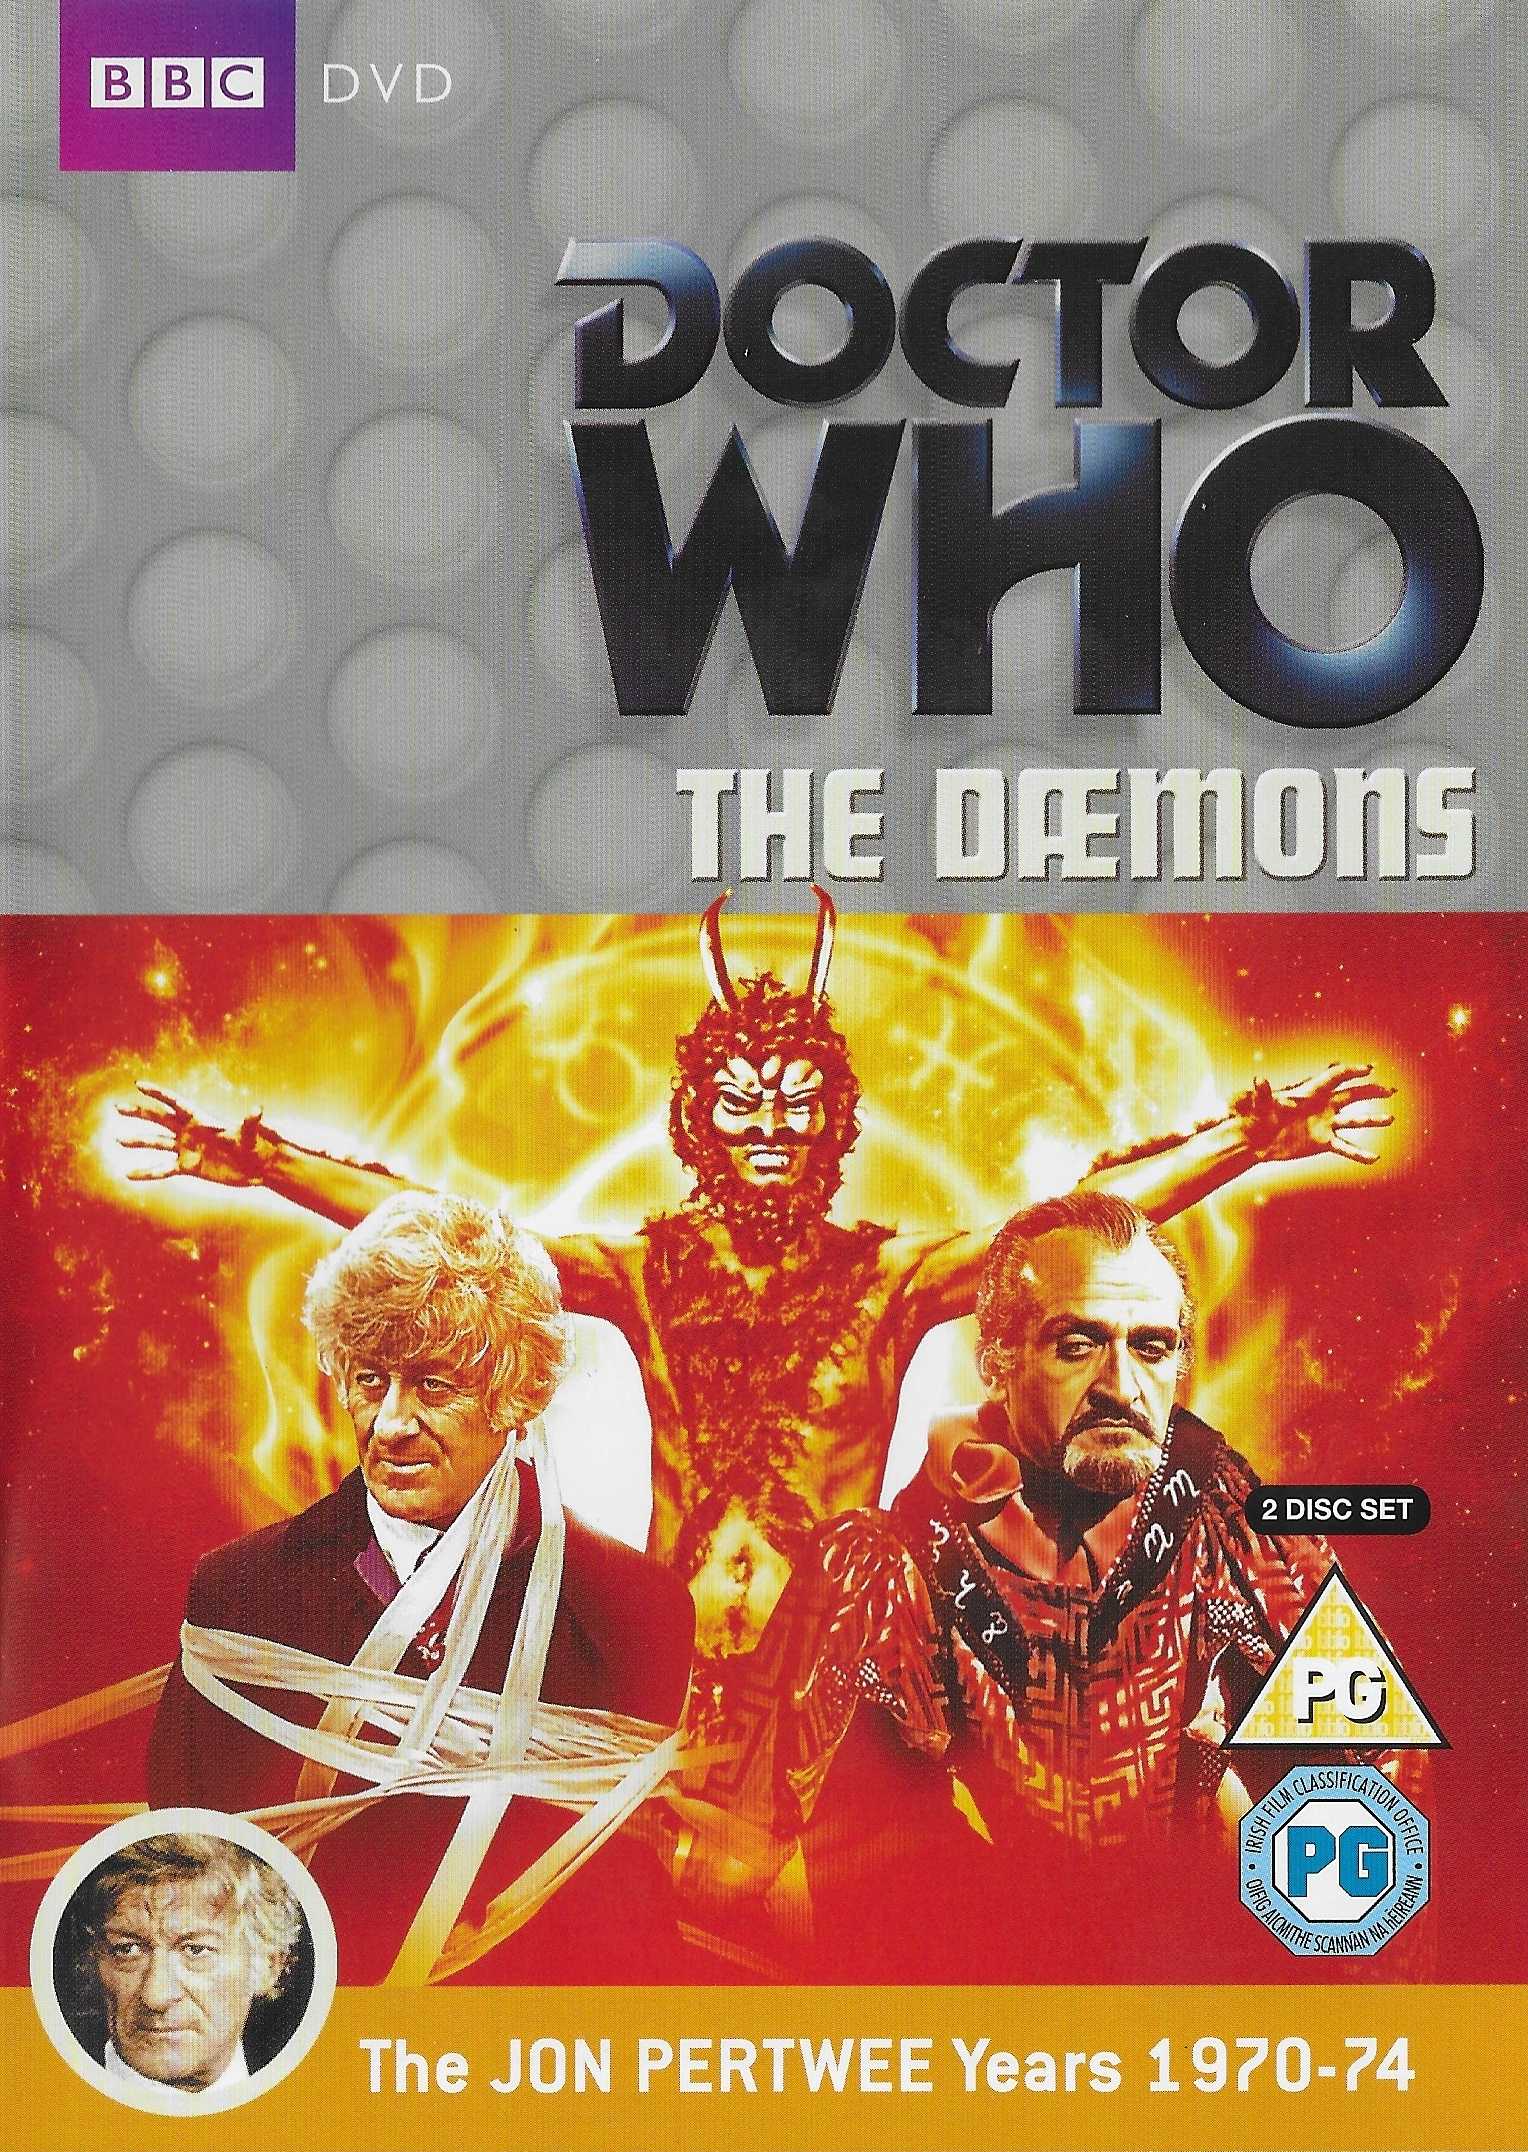 Picture of BBCDVD 3383 Doctor Who - The Daemons by artist Guy Leopold from the BBC dvds - Records and Tapes library